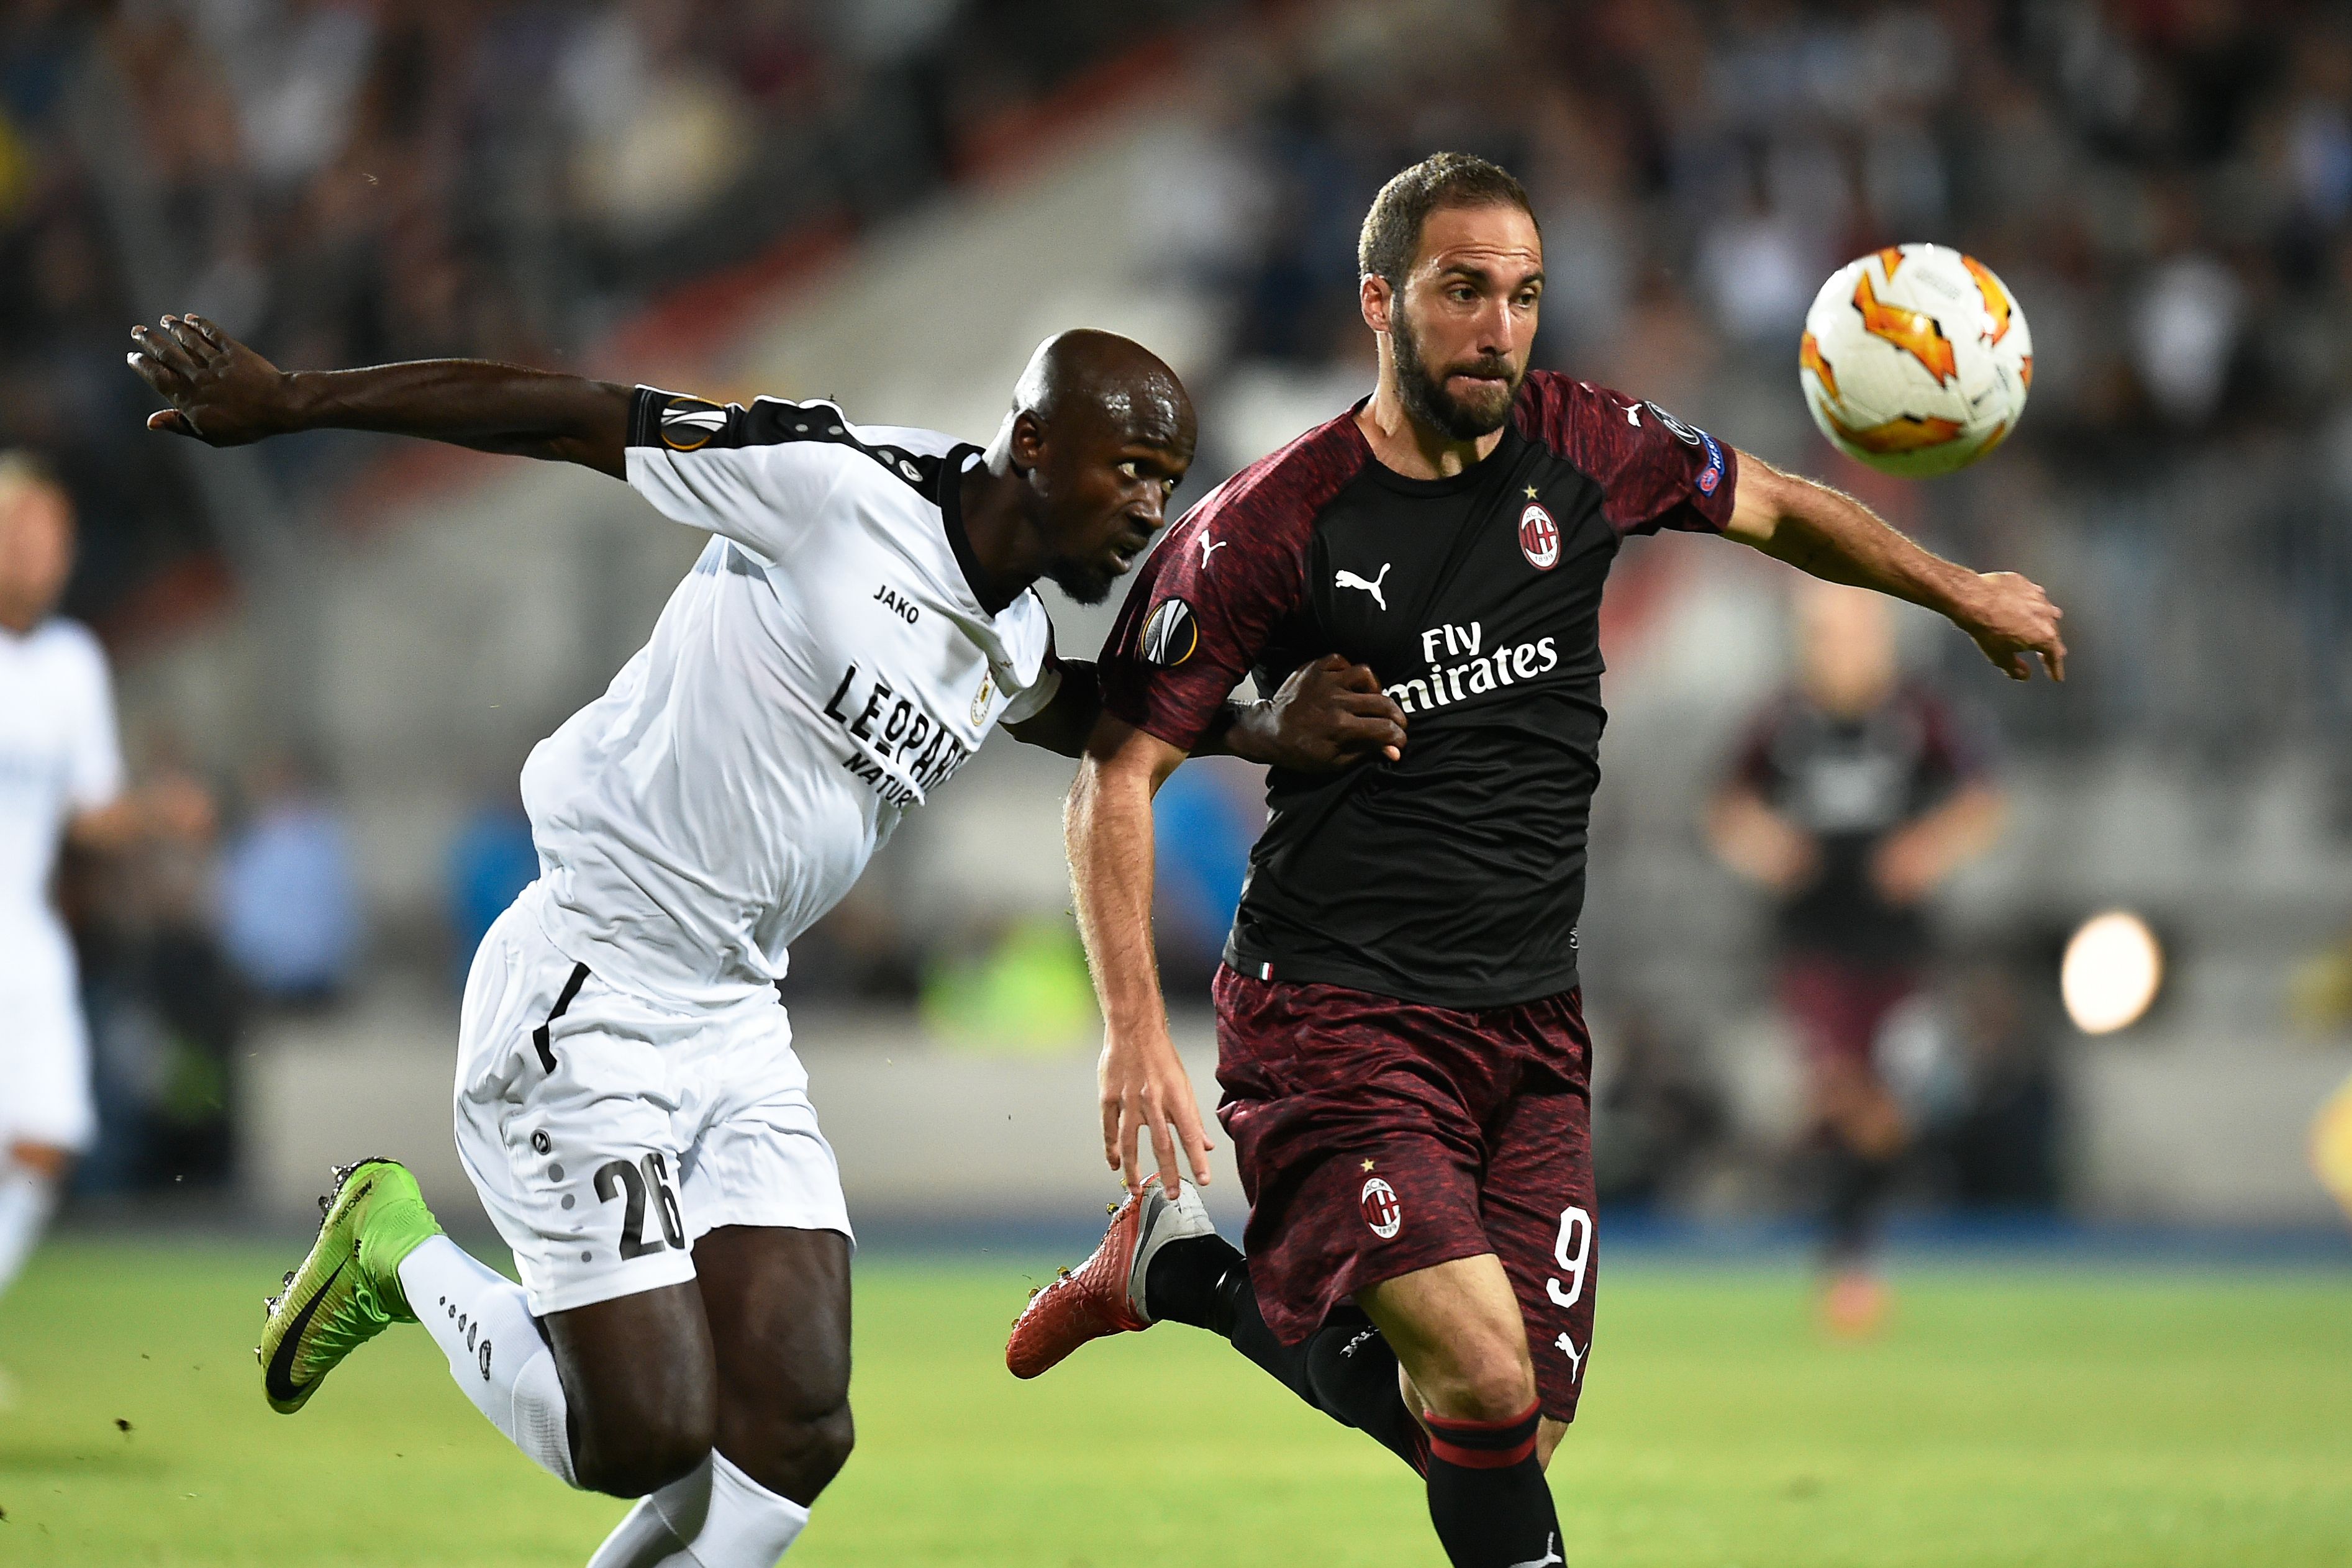 F91 Dudelange's Ghanaian defender Jerry Prempeh (L) vies for the ball with AC Milan's Argentinian forward Gonzalo Higuain during the UEFA Europa League Group F football match between F91 Dudelange and AC Milan at the Josy Barthel Stadium in Luxembourg, on September 20, 2018. (Photo by JOHN THYS / AFP) (Photo credit should read JOHN THYS/AFP/Getty Images)